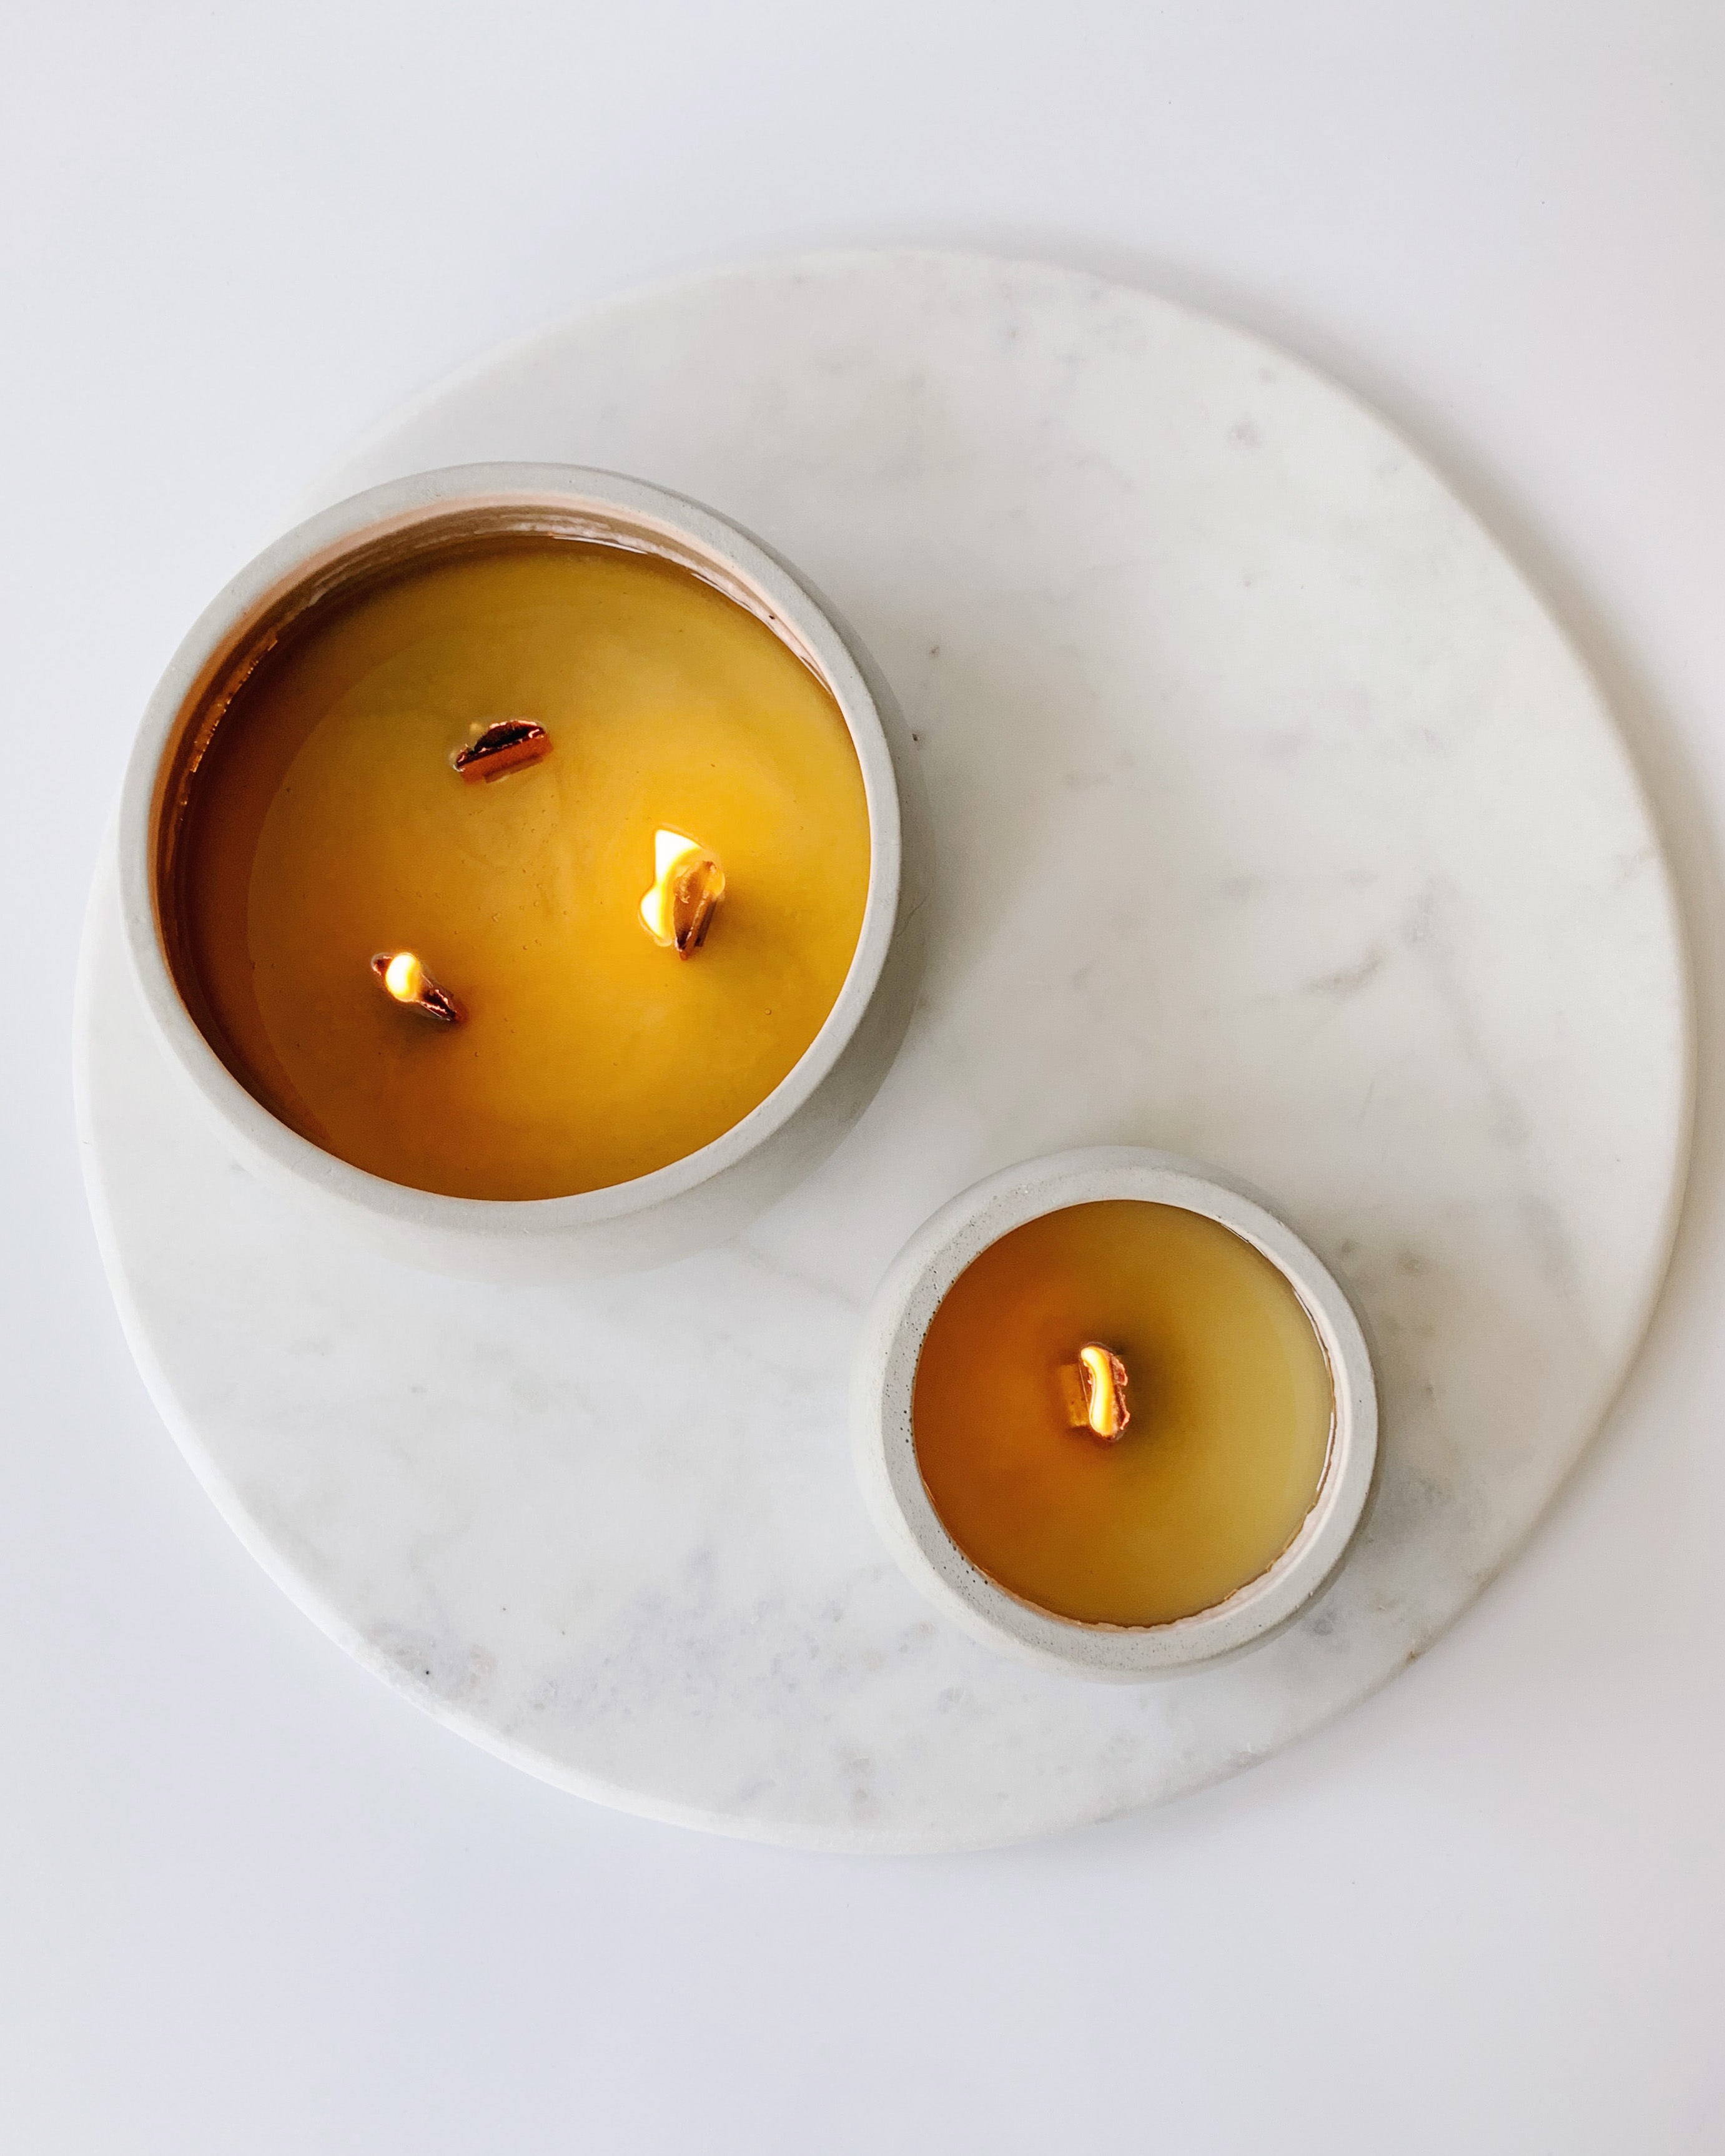 Mull It Over Coconut Soy Candle - Concrete Wooden Wick Vessel